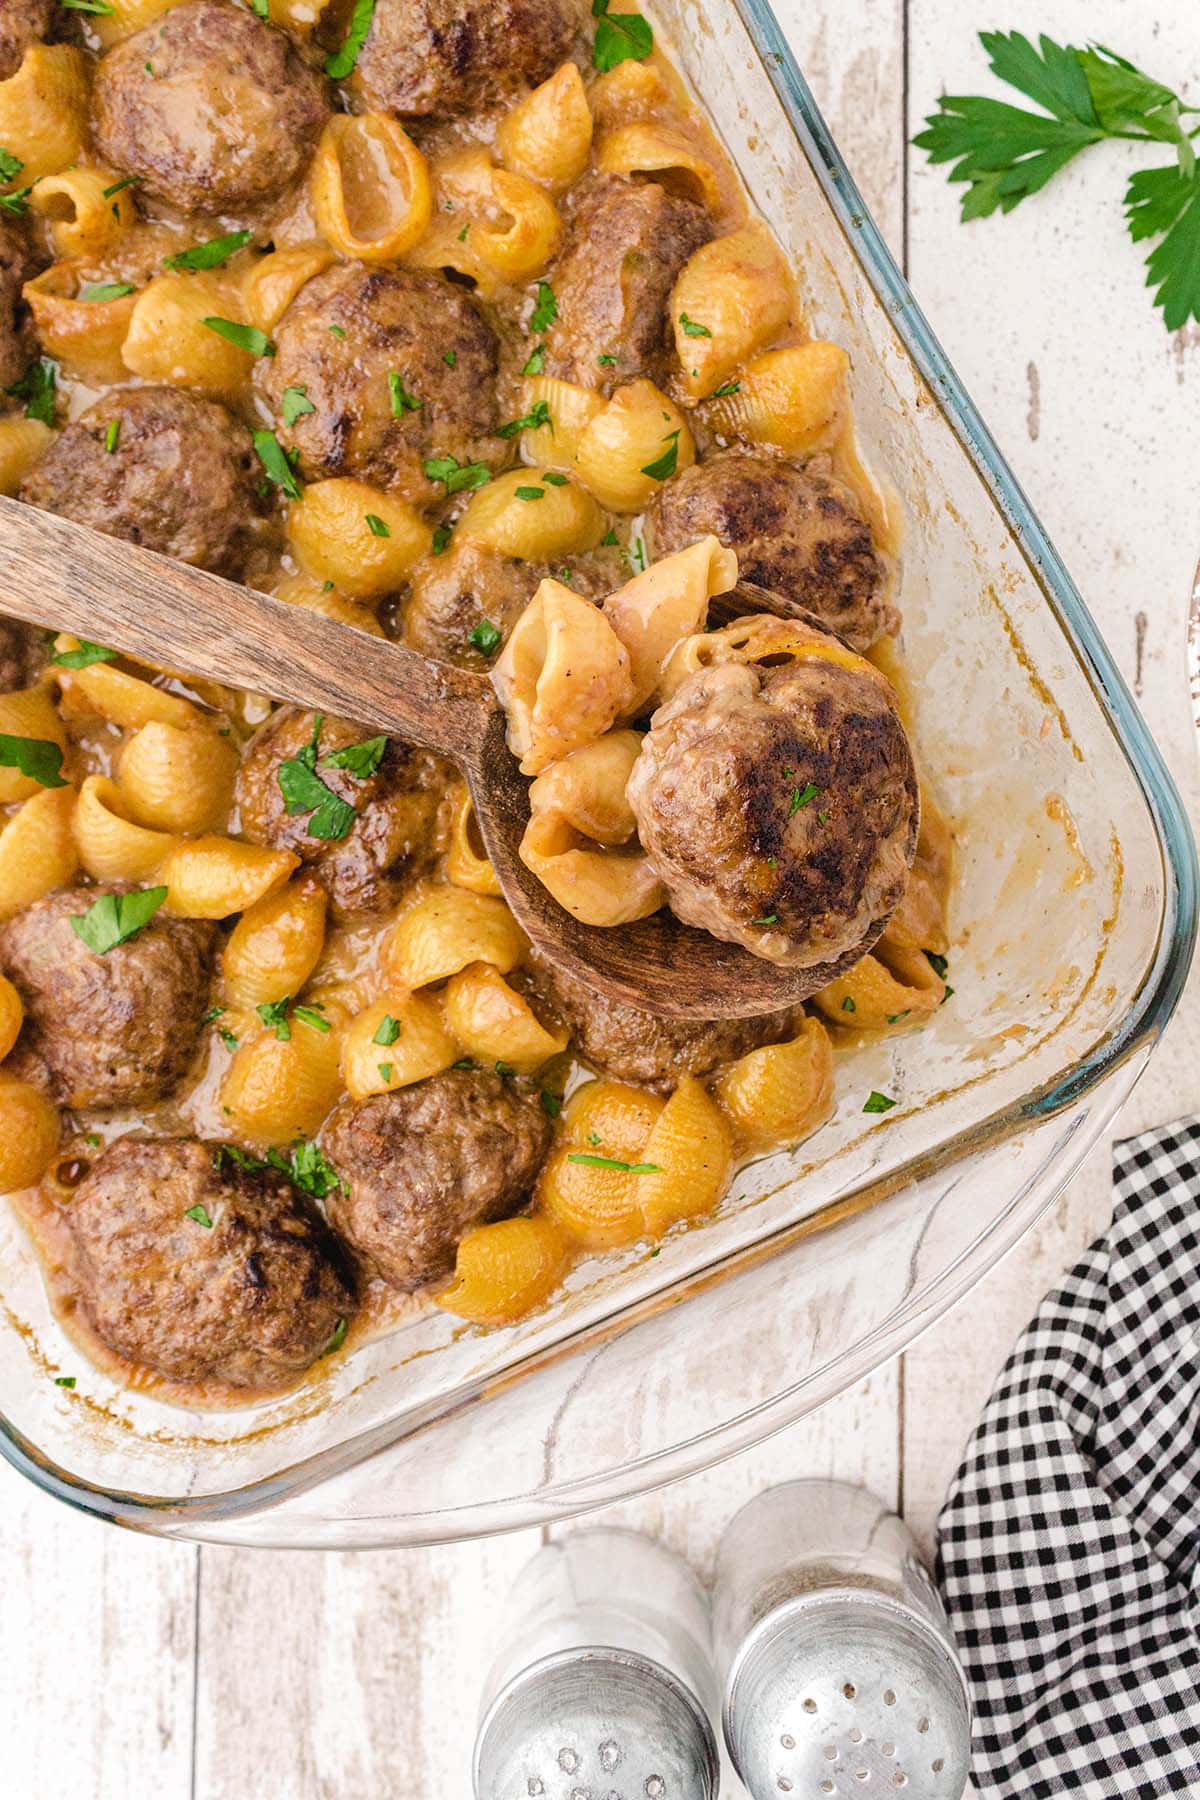 A box filled with different types of food, with Meatball and Recipes